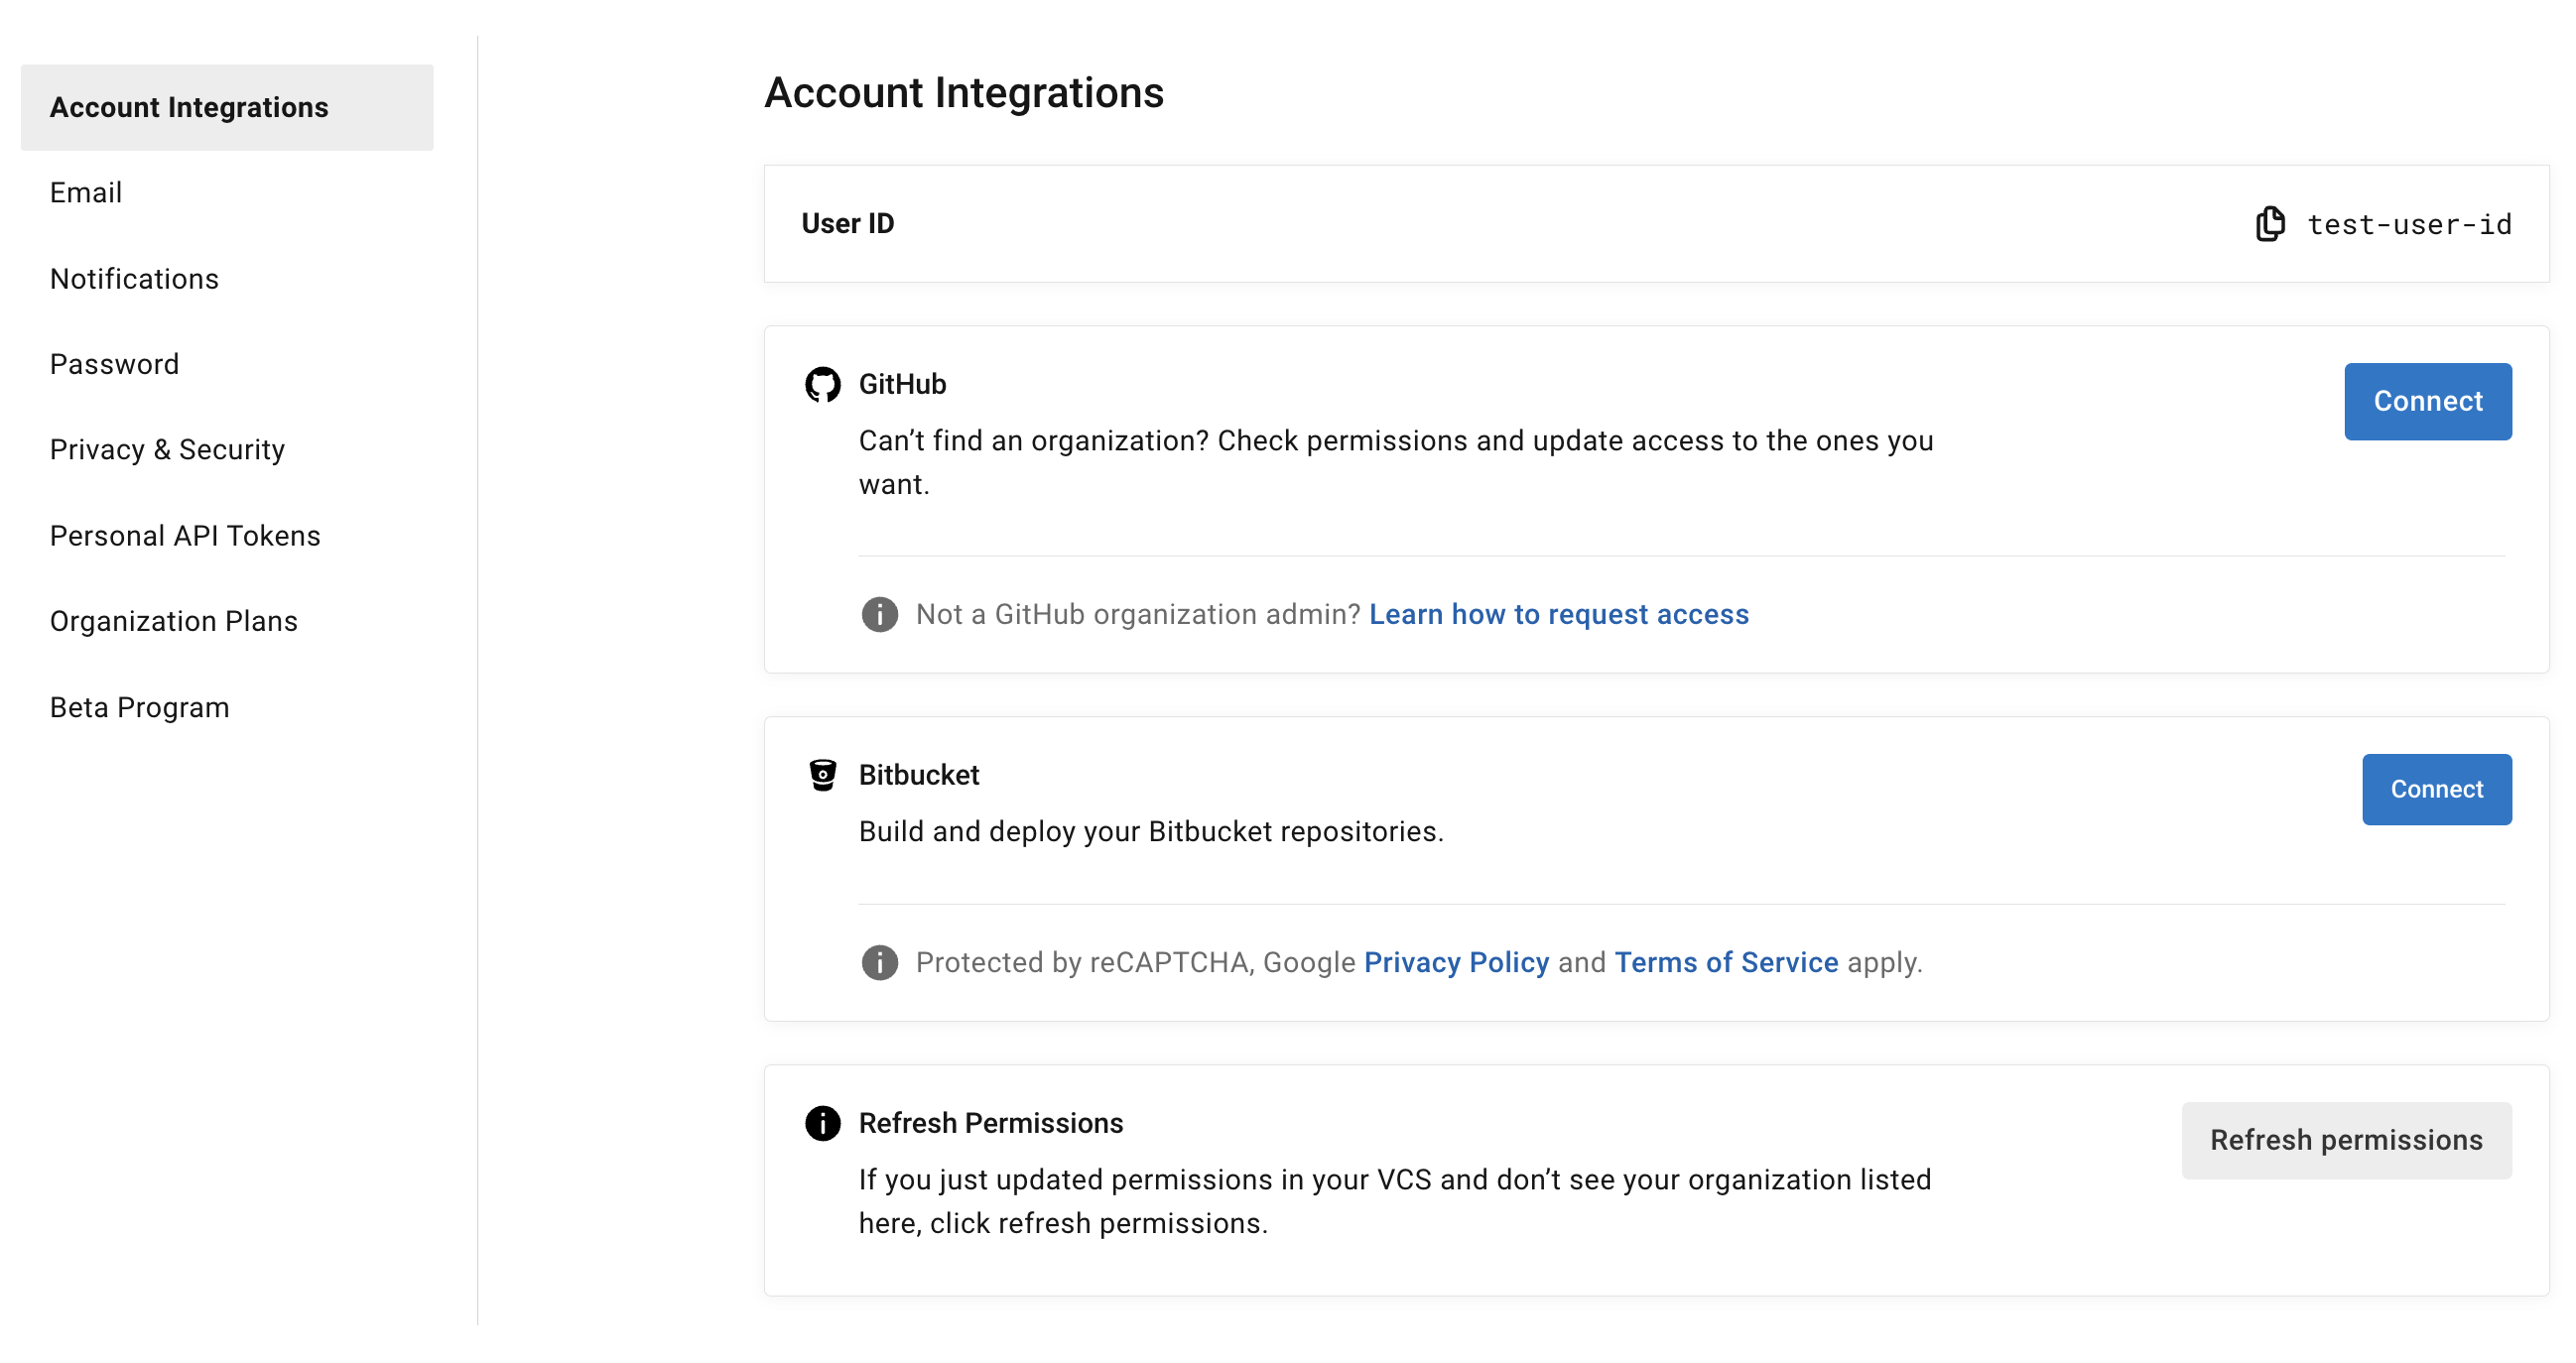 User account integrations page